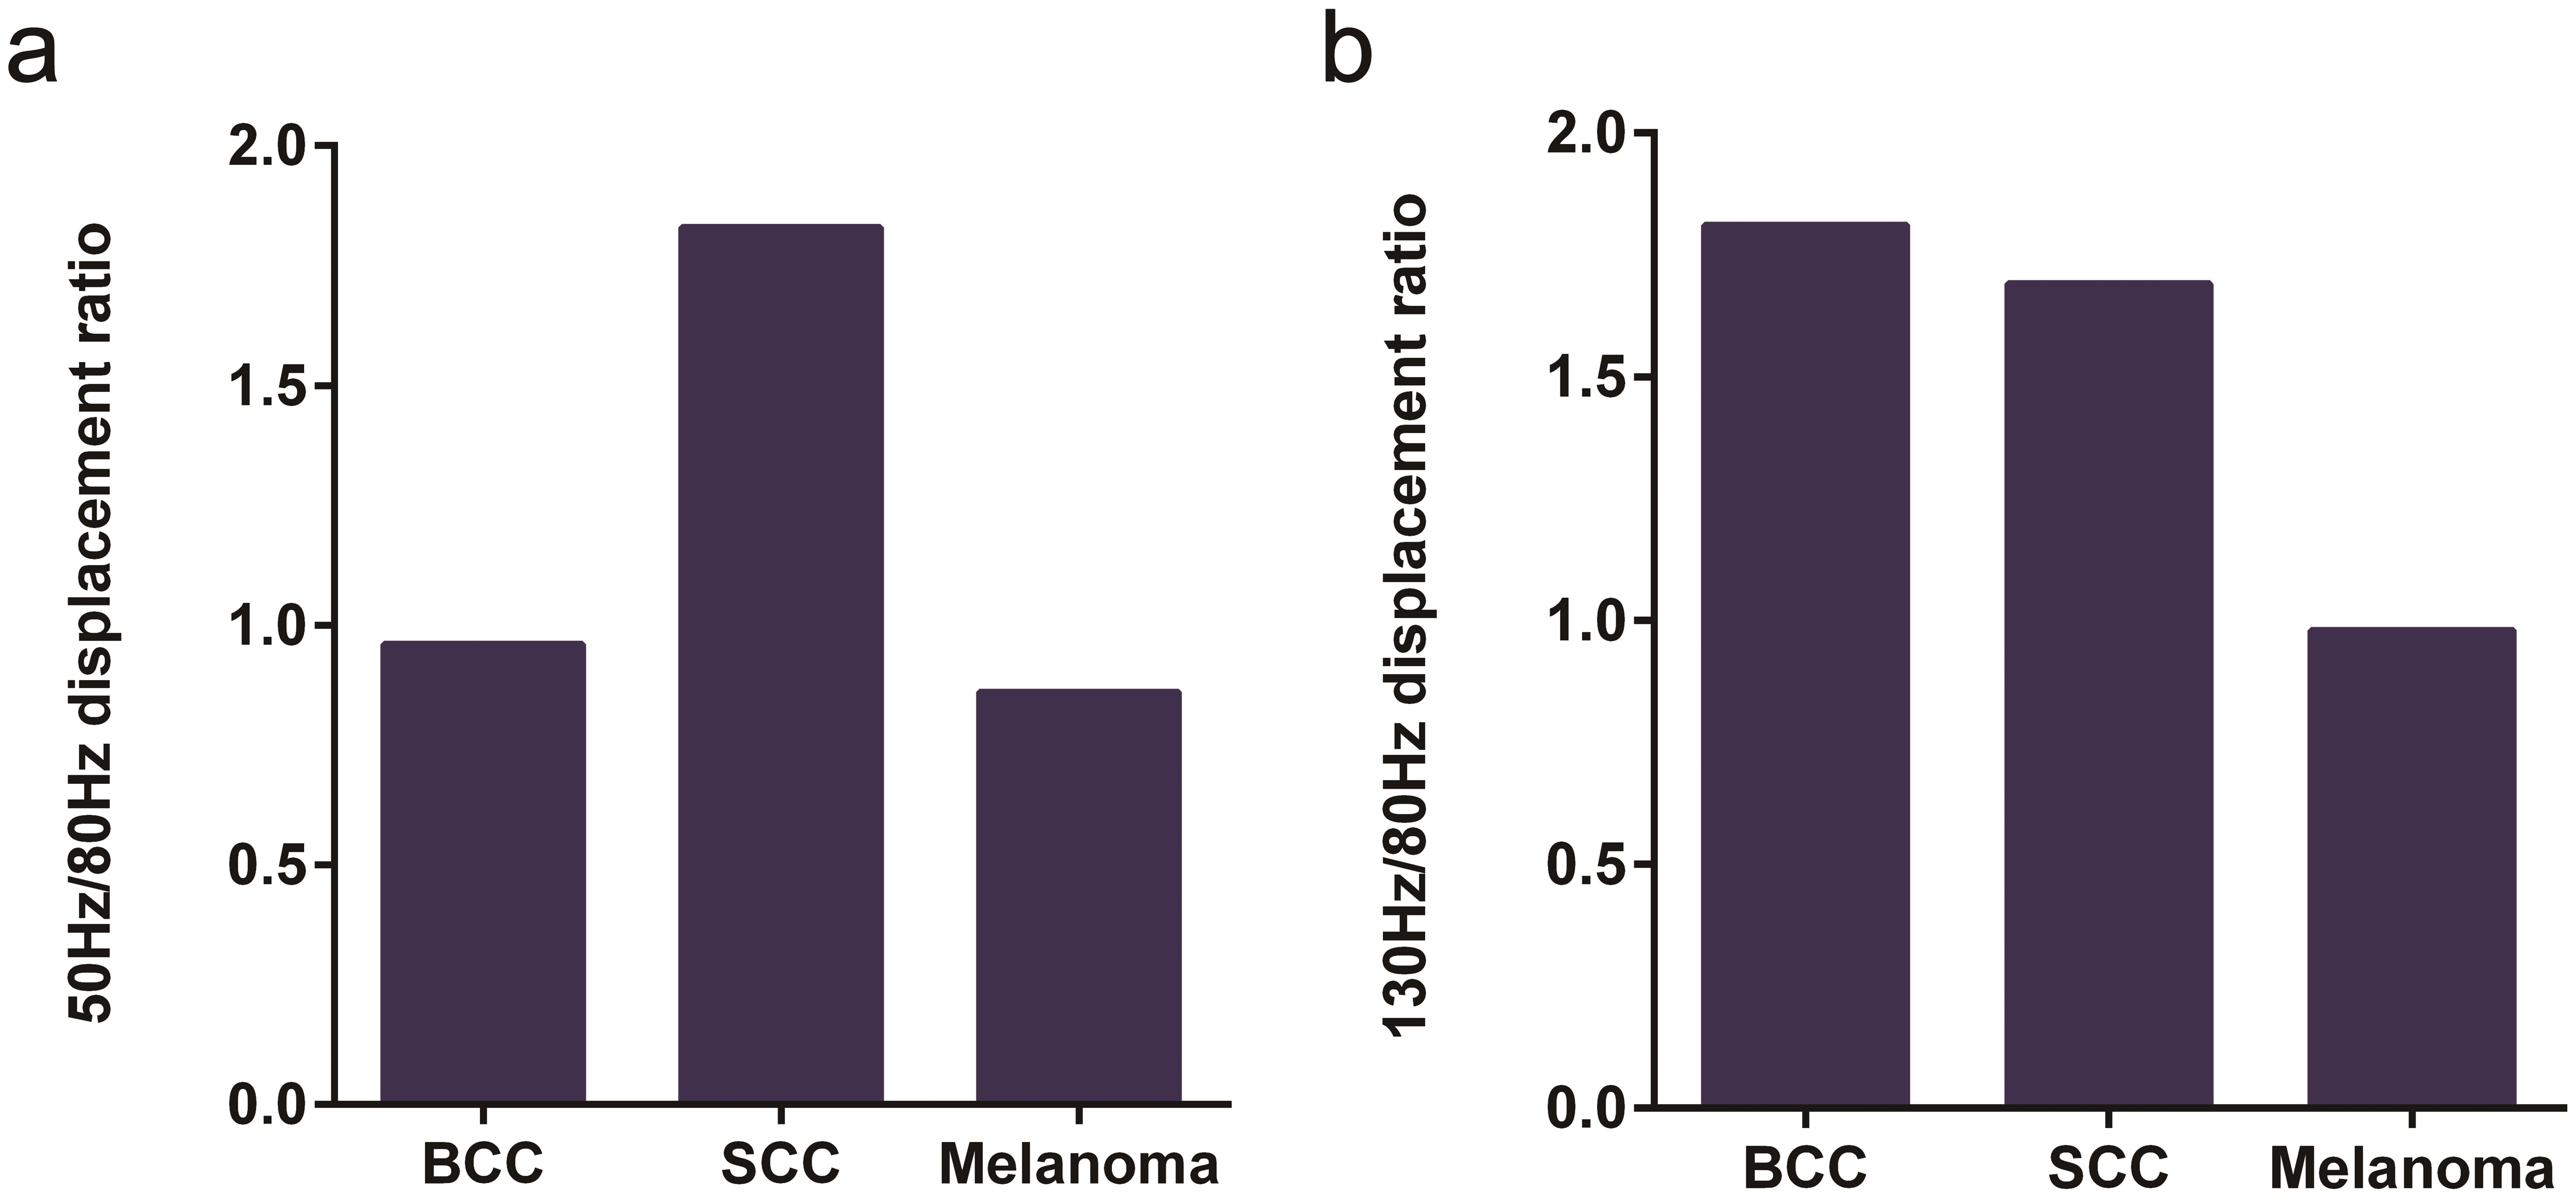 (a) Bar graph showing the 50 Hz/80 Hz ratio peak heights for BCC, SCC, and melanoma. The increased 50 Hz/80 Hz ratio is significantly different for SCC compared to melanoma and BCC, as shown in .